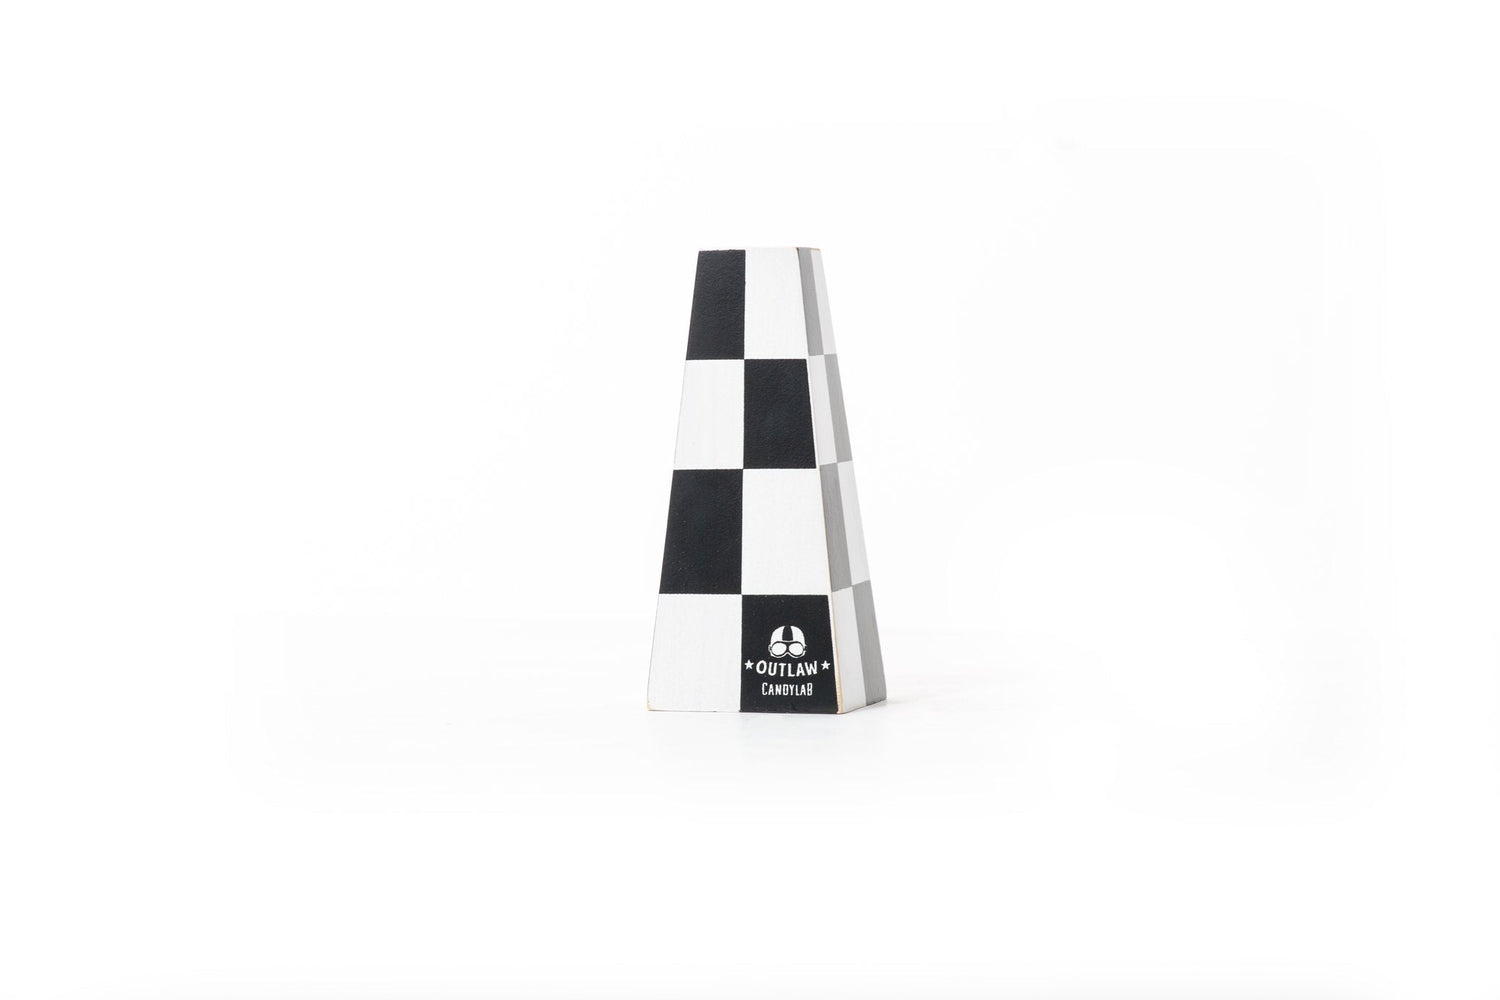 CANDYLAB RACE PYLON by CANDYLAB - The Playful Collective